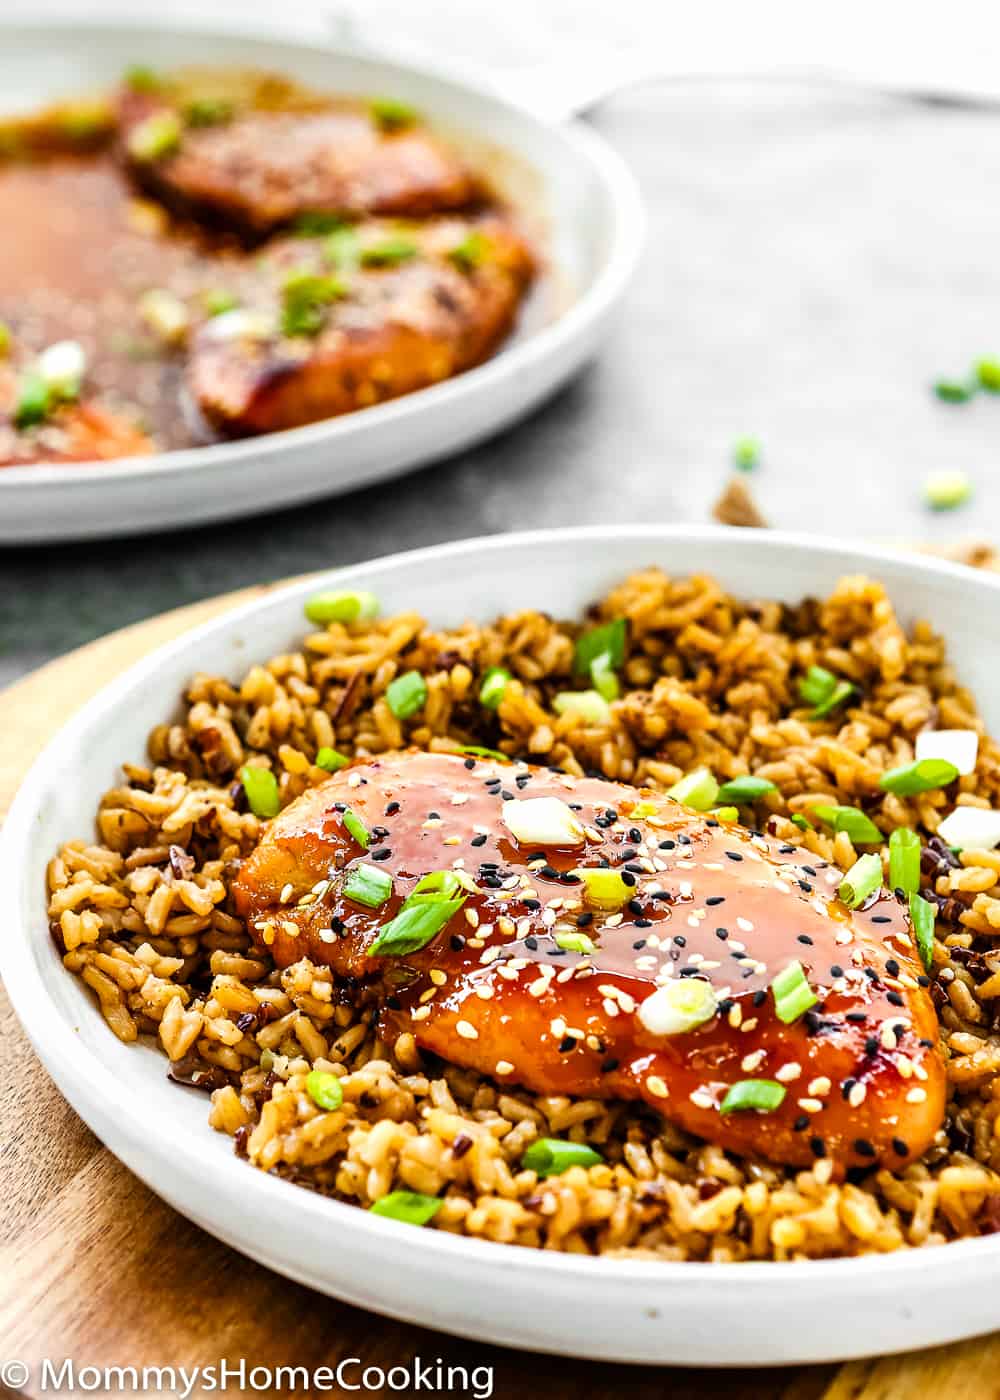 Easy Asian-Style Chicken Breast in a plate with rice